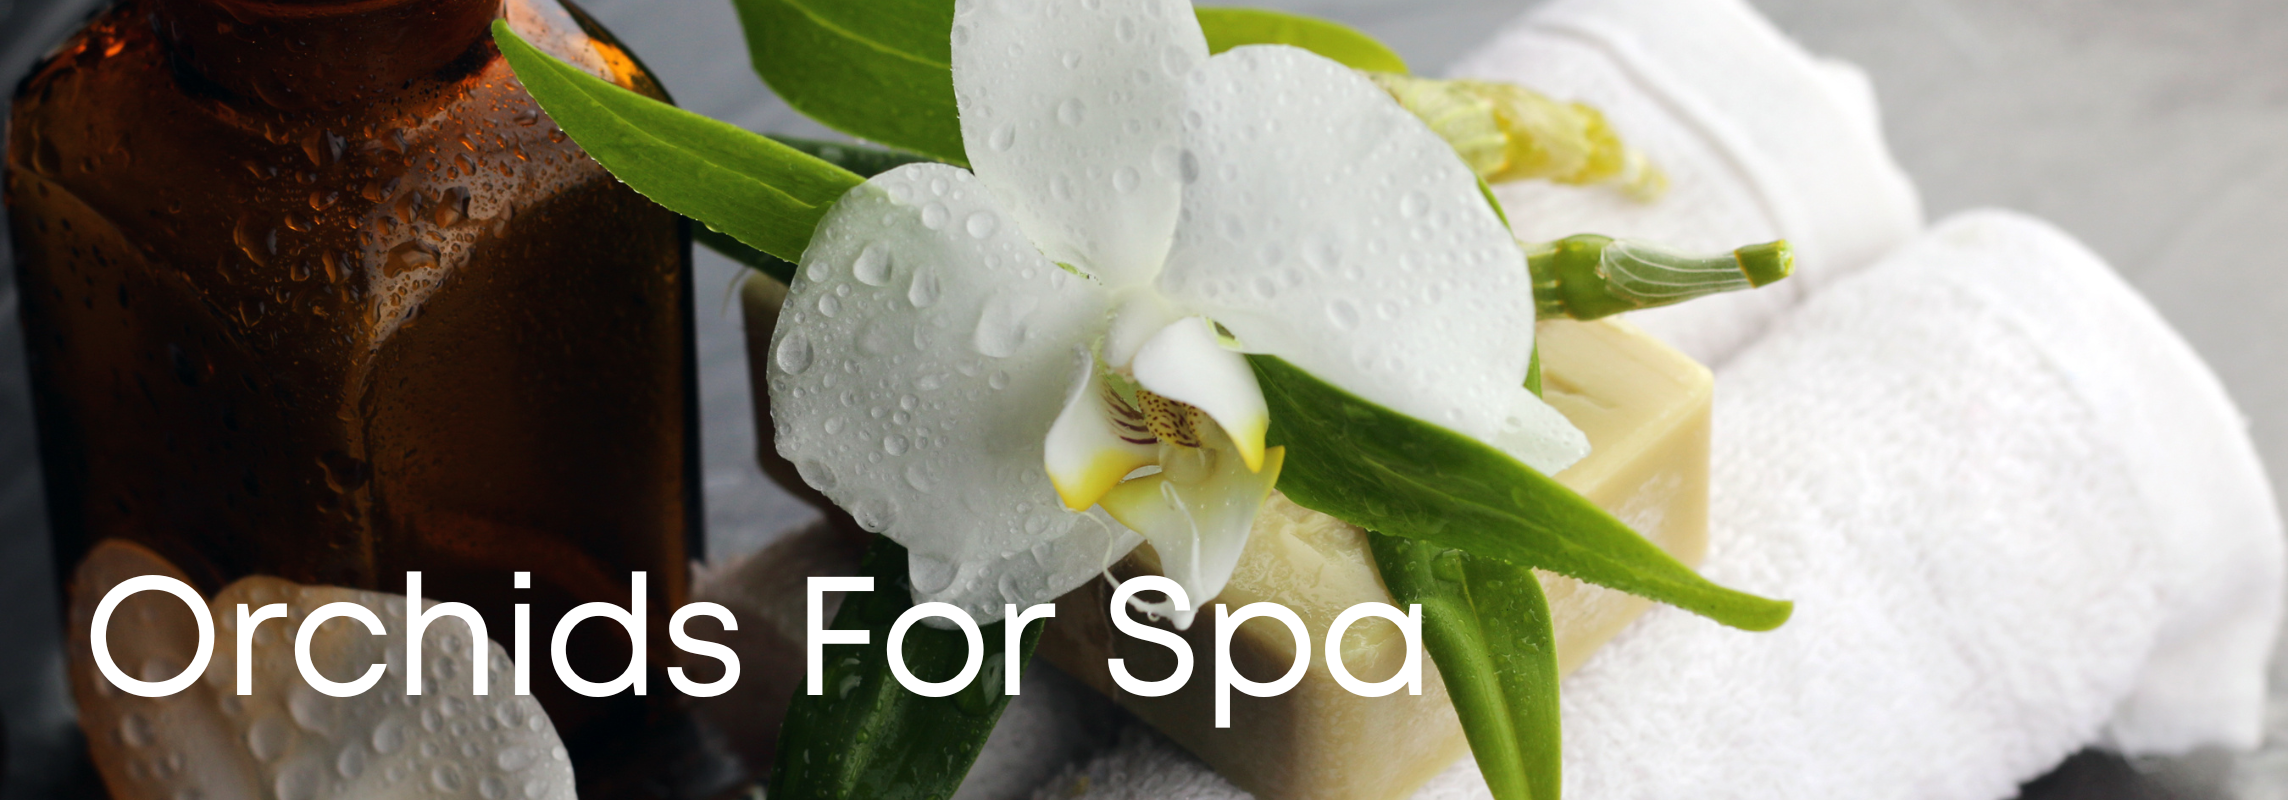 orchids for spa